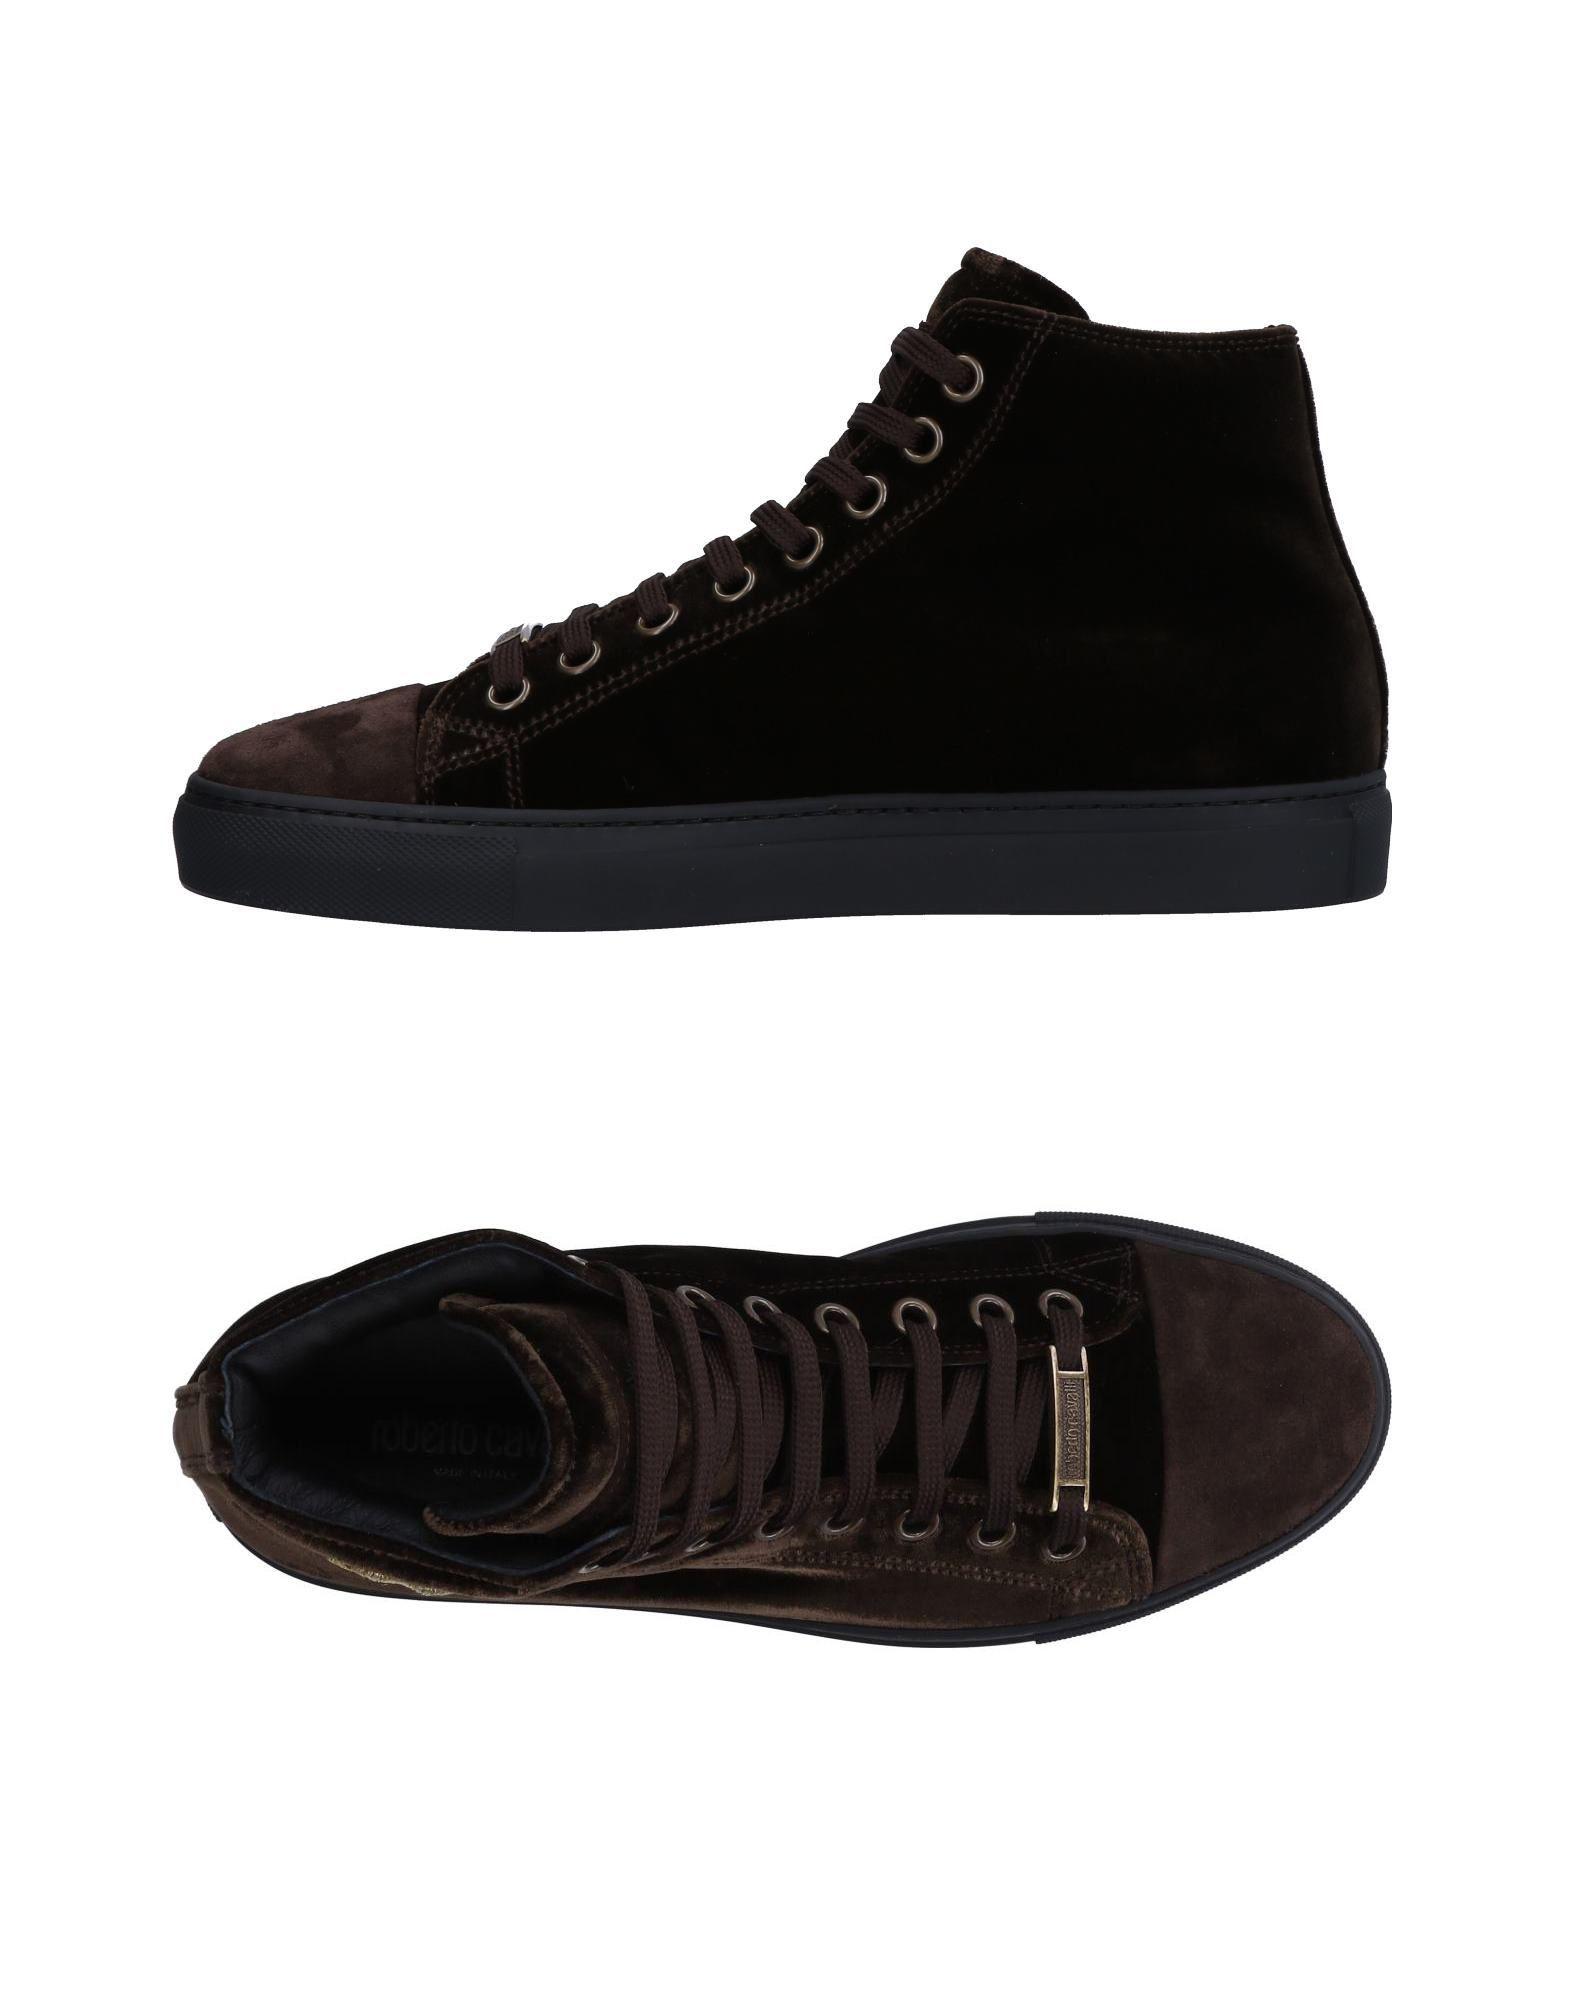 Roberto Cavalli Leather High-tops & Sneakers in Dark Brown (Brown) for ...